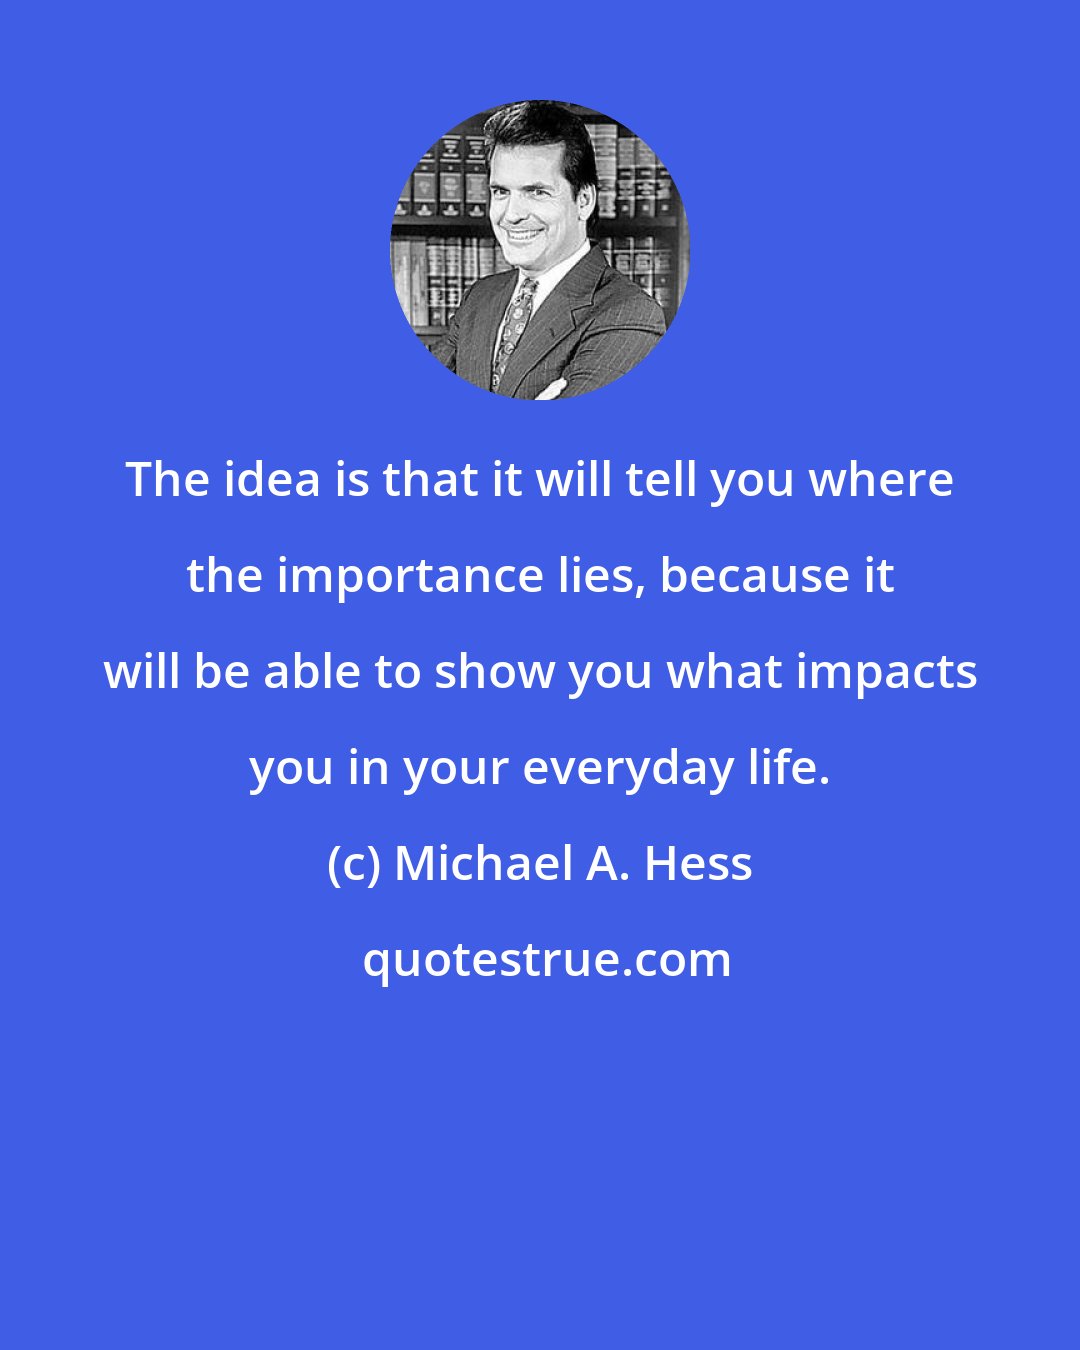 Michael A. Hess: The idea is that it will tell you where the importance lies, because it will be able to show you what impacts you in your everyday life.